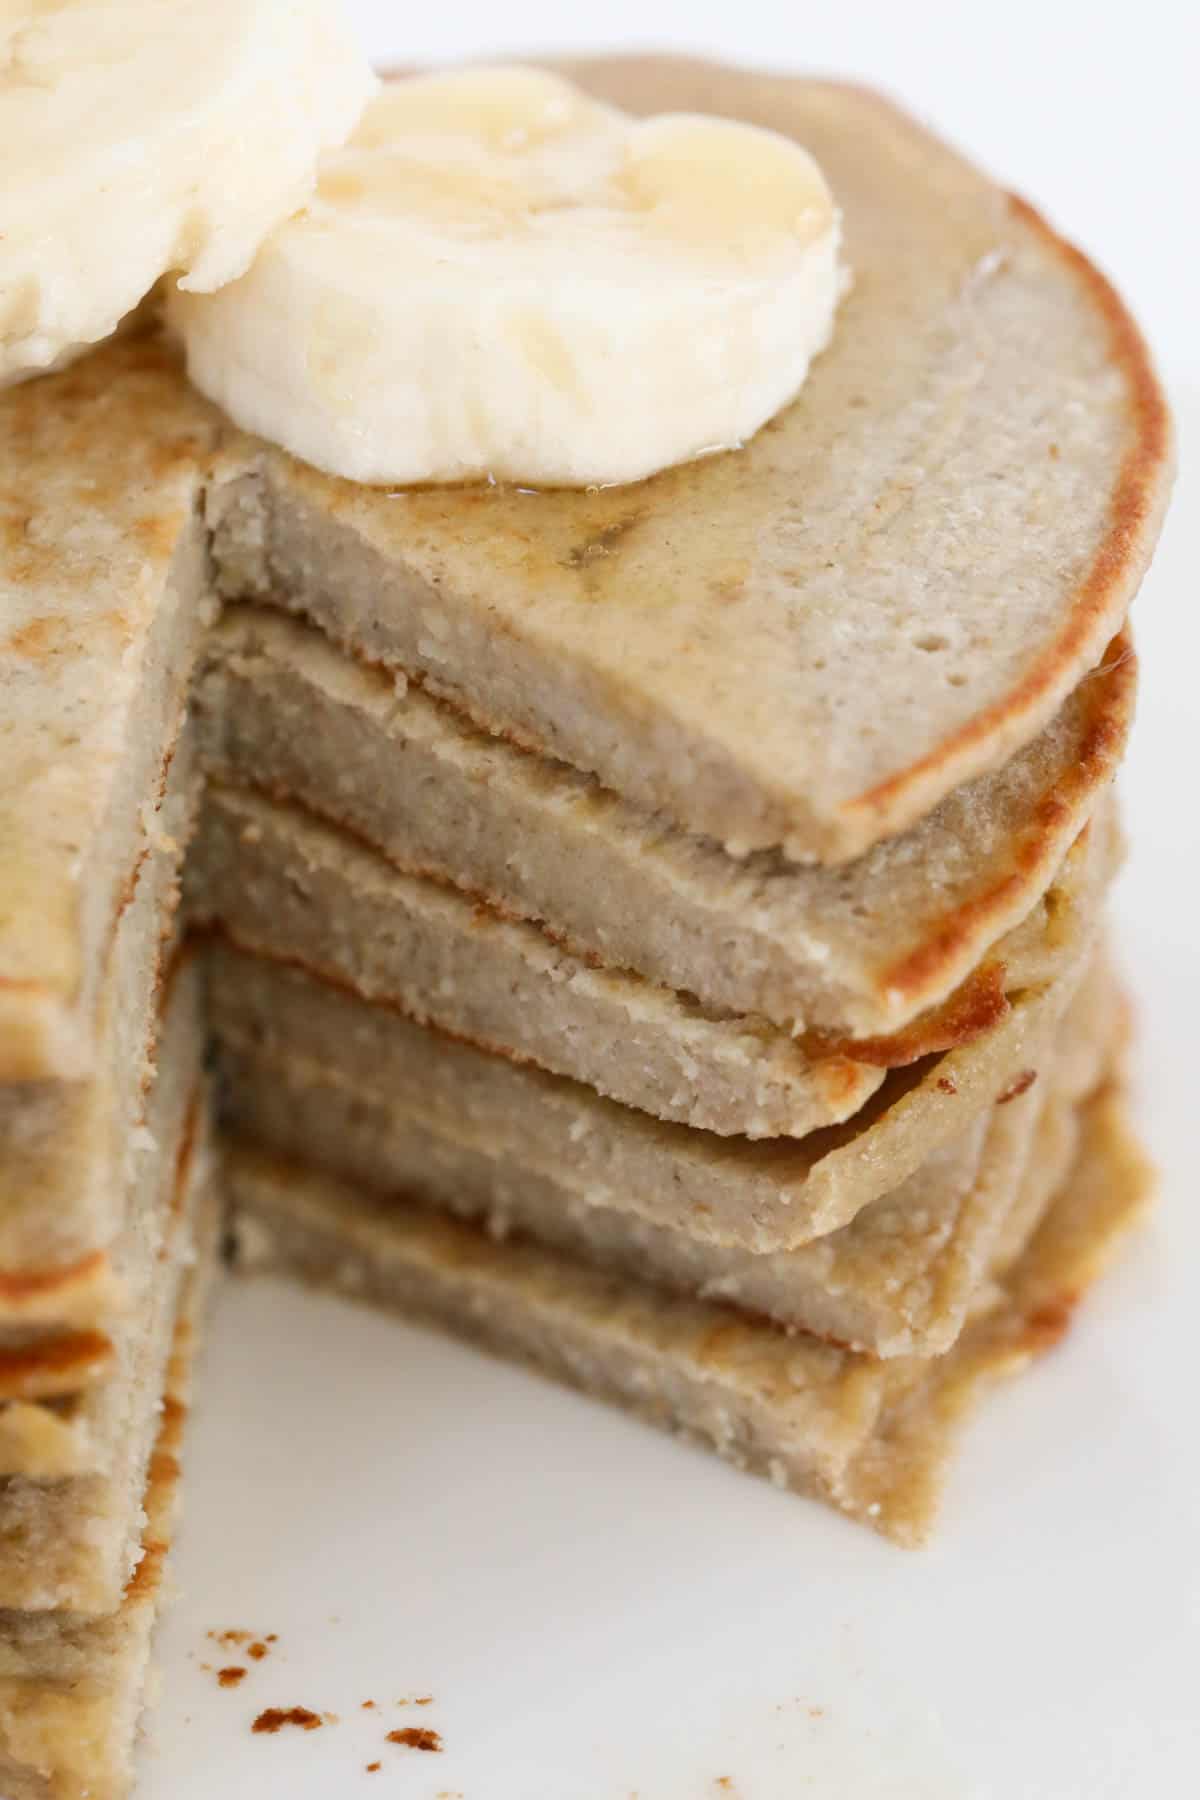 A stack of pancakes with a portion cut out to show the texture.